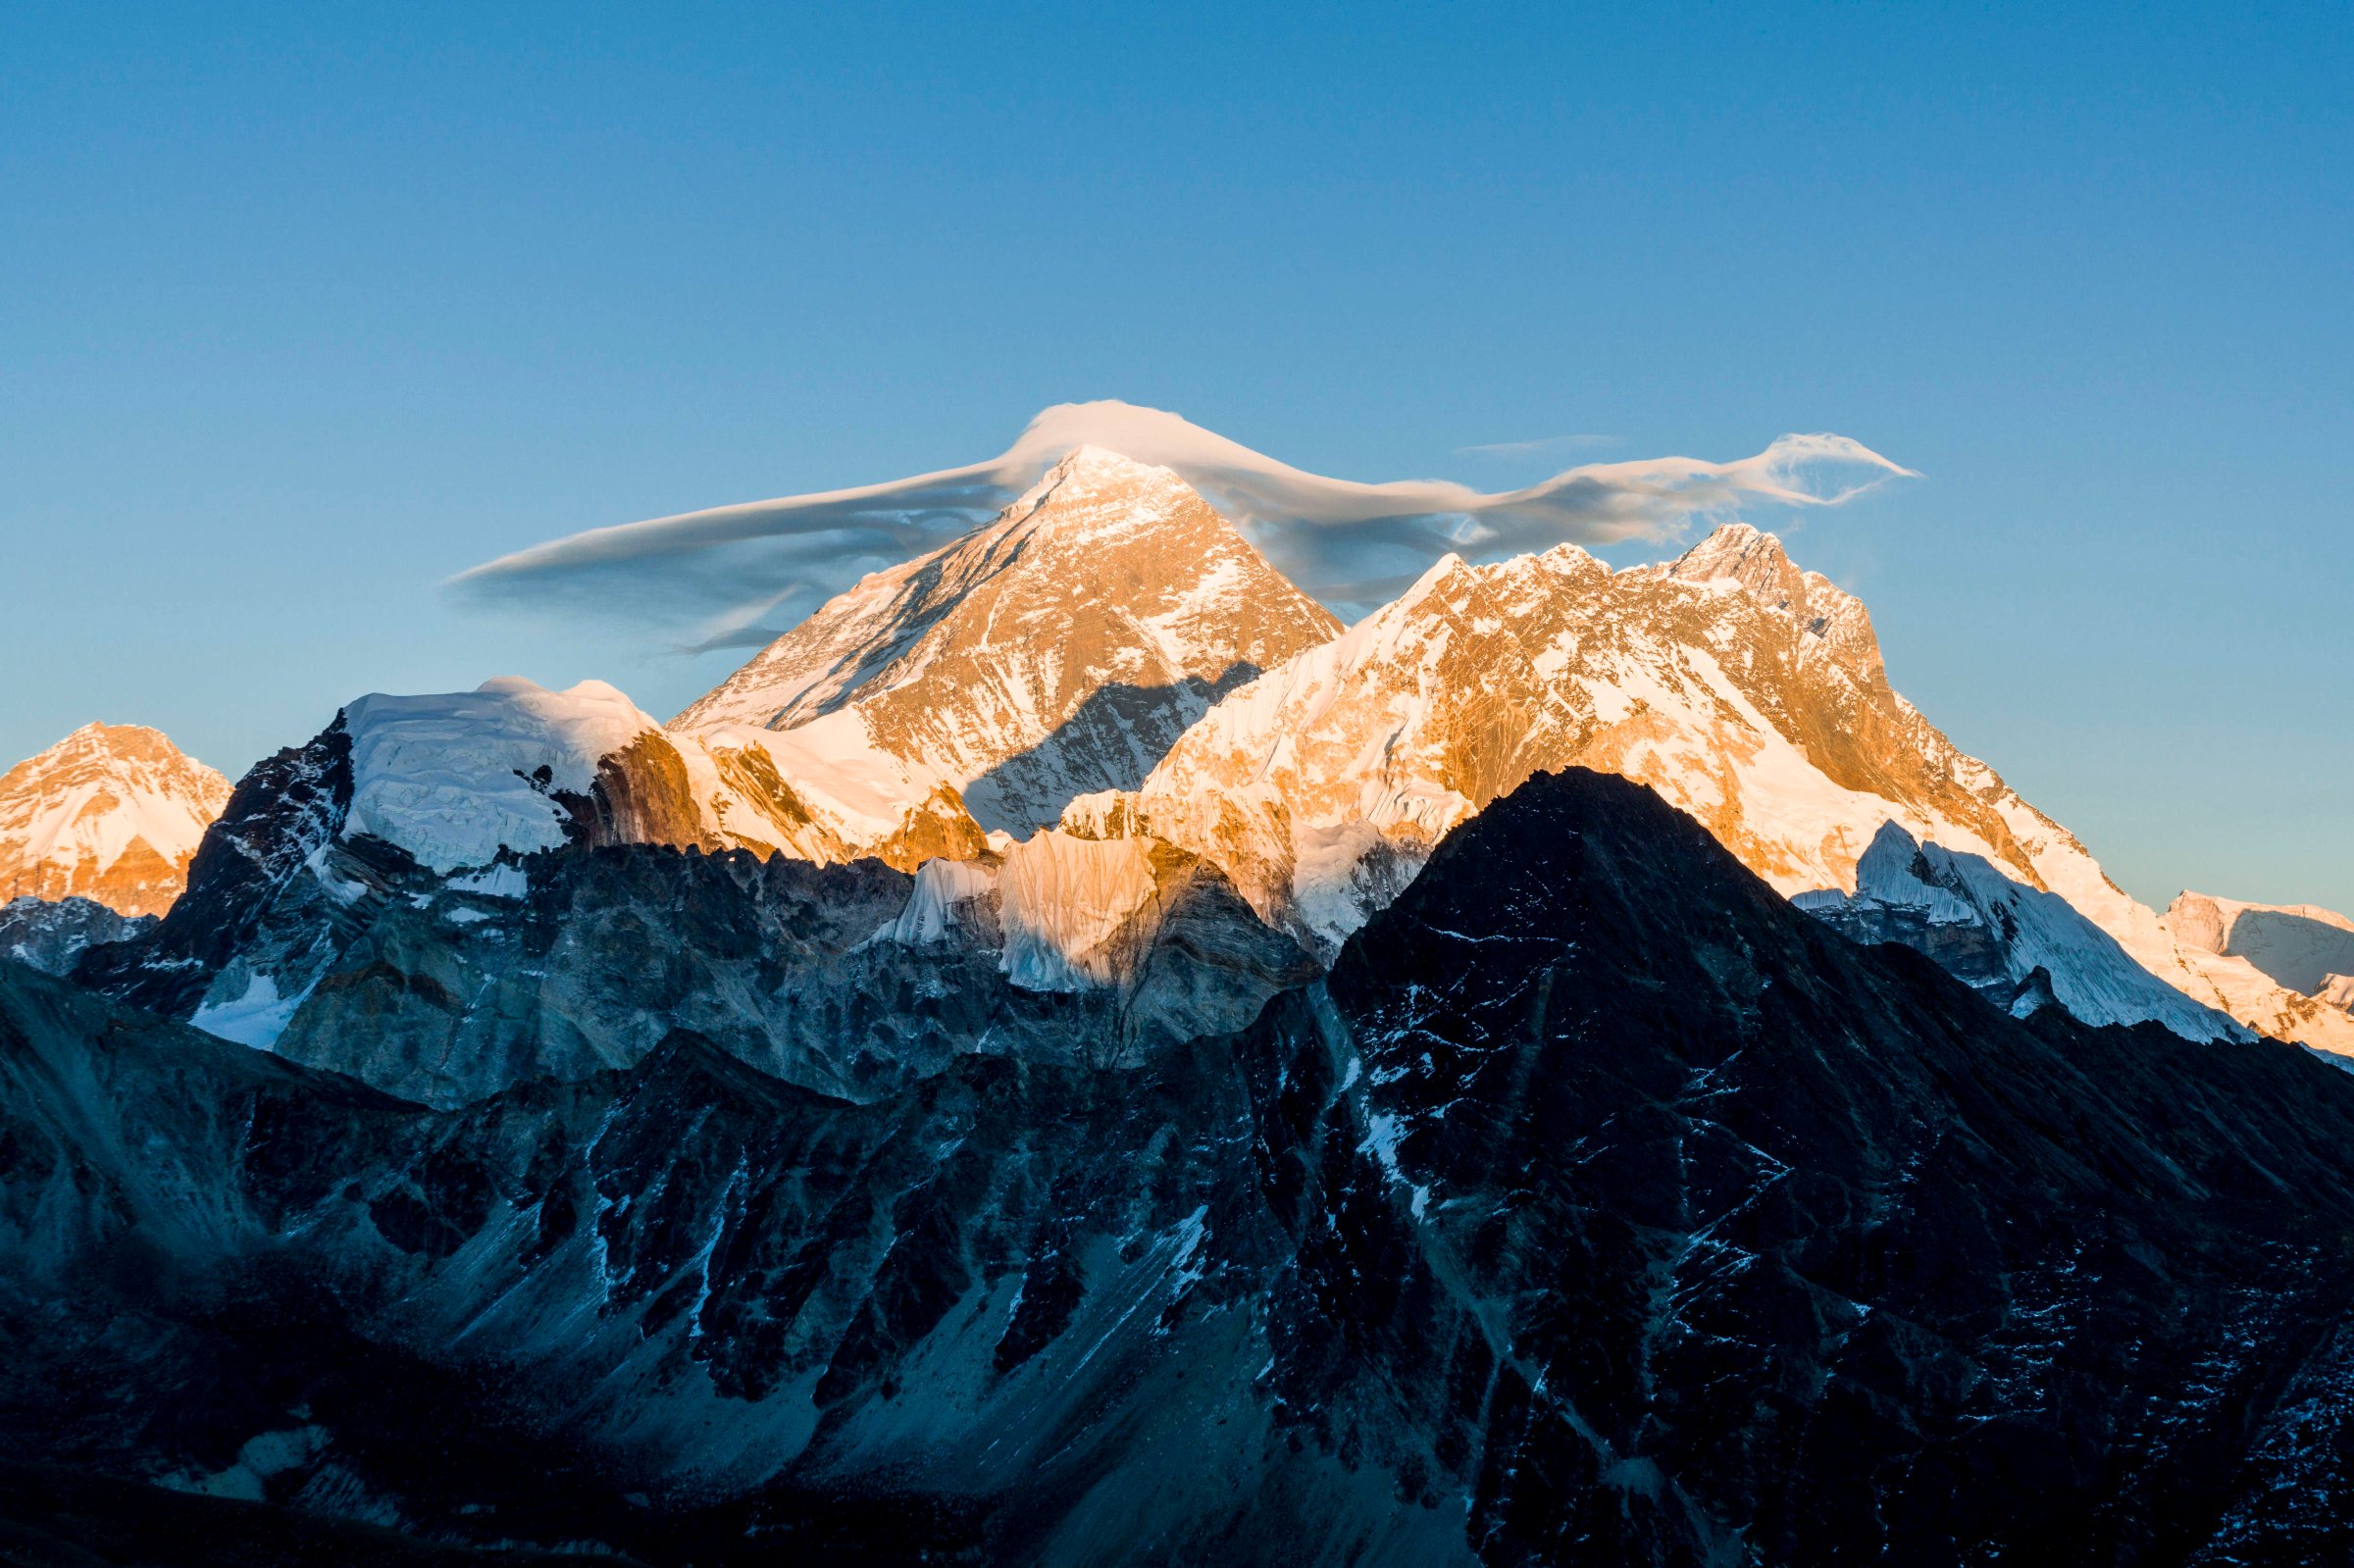 The mountain Mt. Everest (8848m) with a white cloud on top, seen from Gokyo Ri (5360m) at sunset.